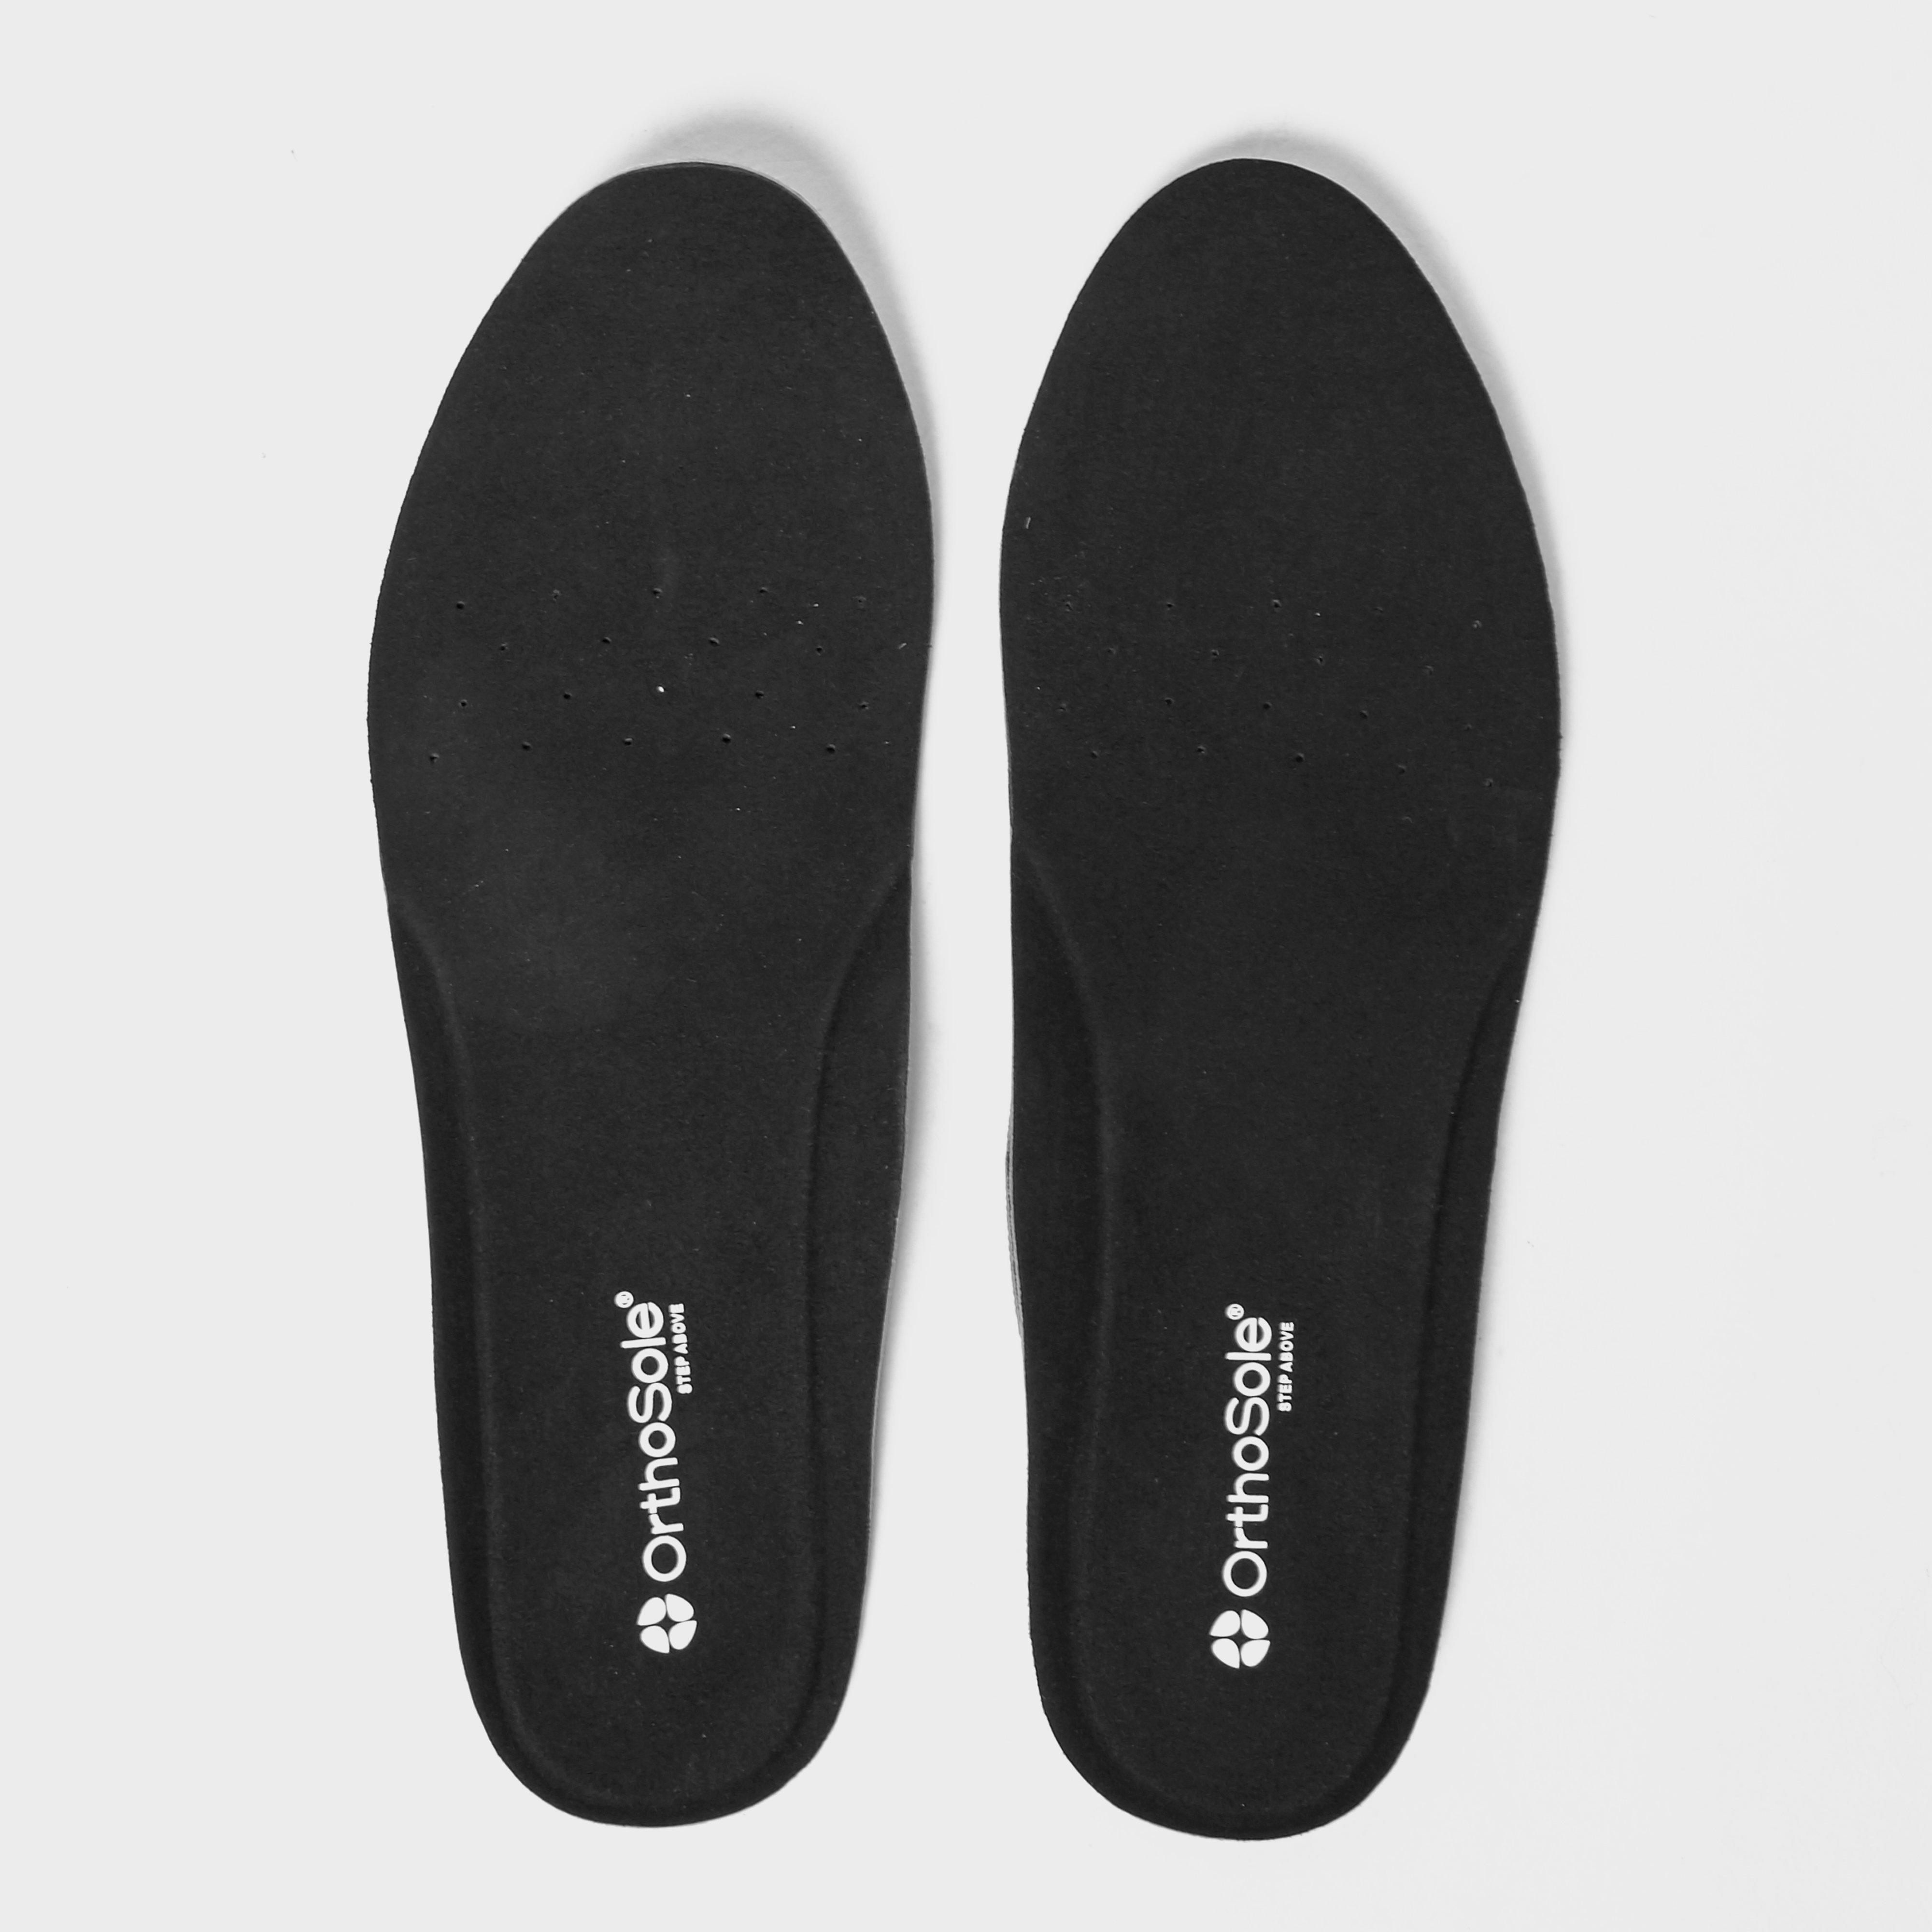 Orthosole Mens Thin Style Insoles  Black